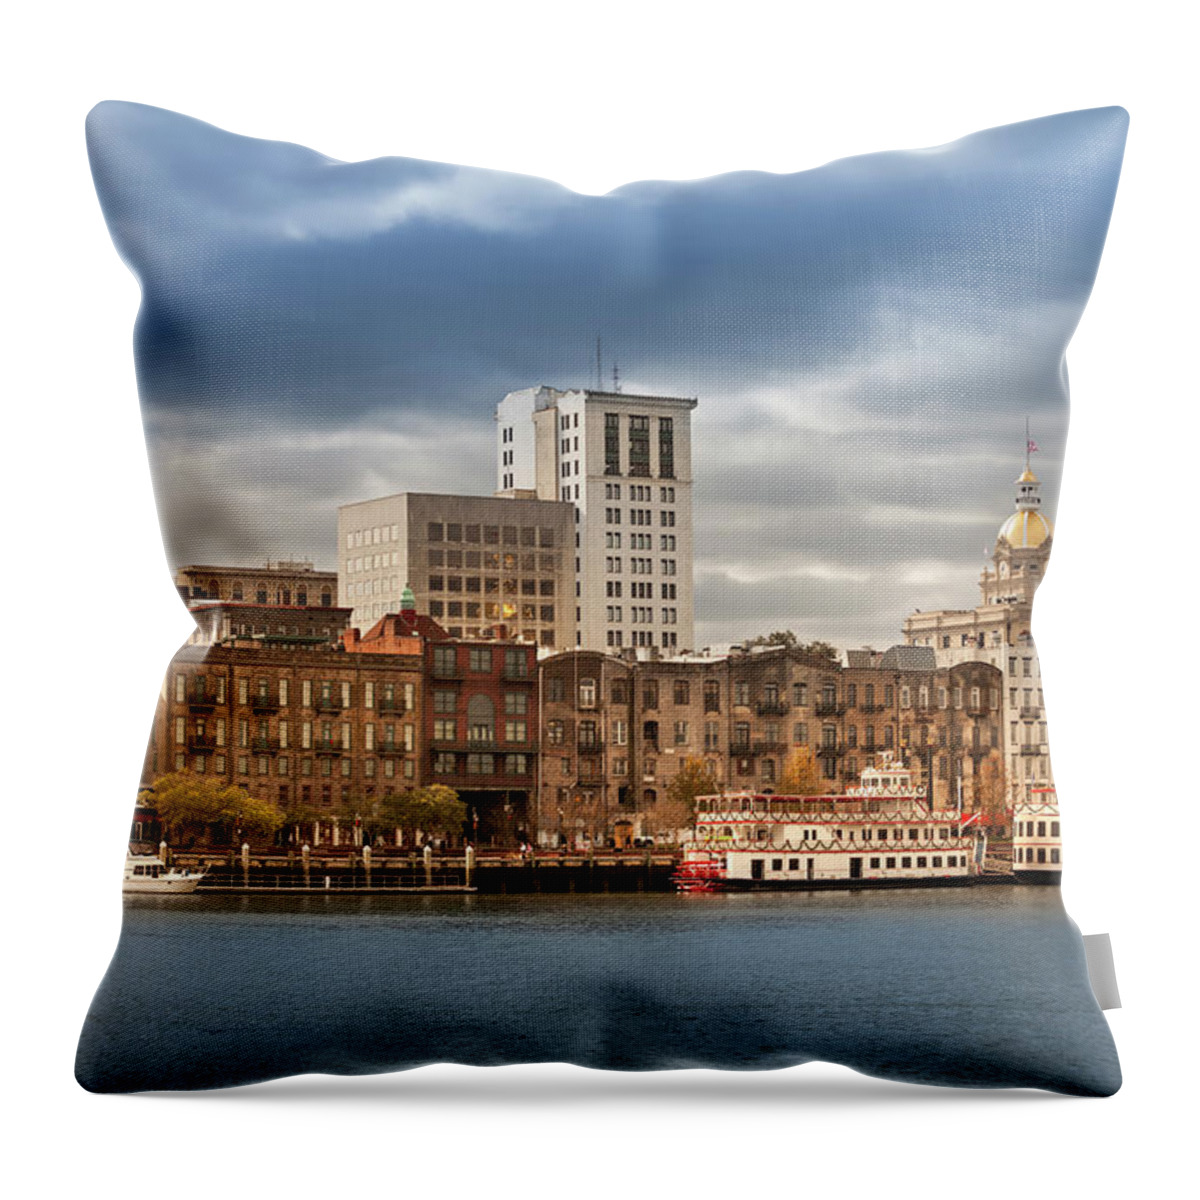 Scenics Throw Pillow featuring the photograph Waterfront Skyline Of Savannah Georgia by Pgiam